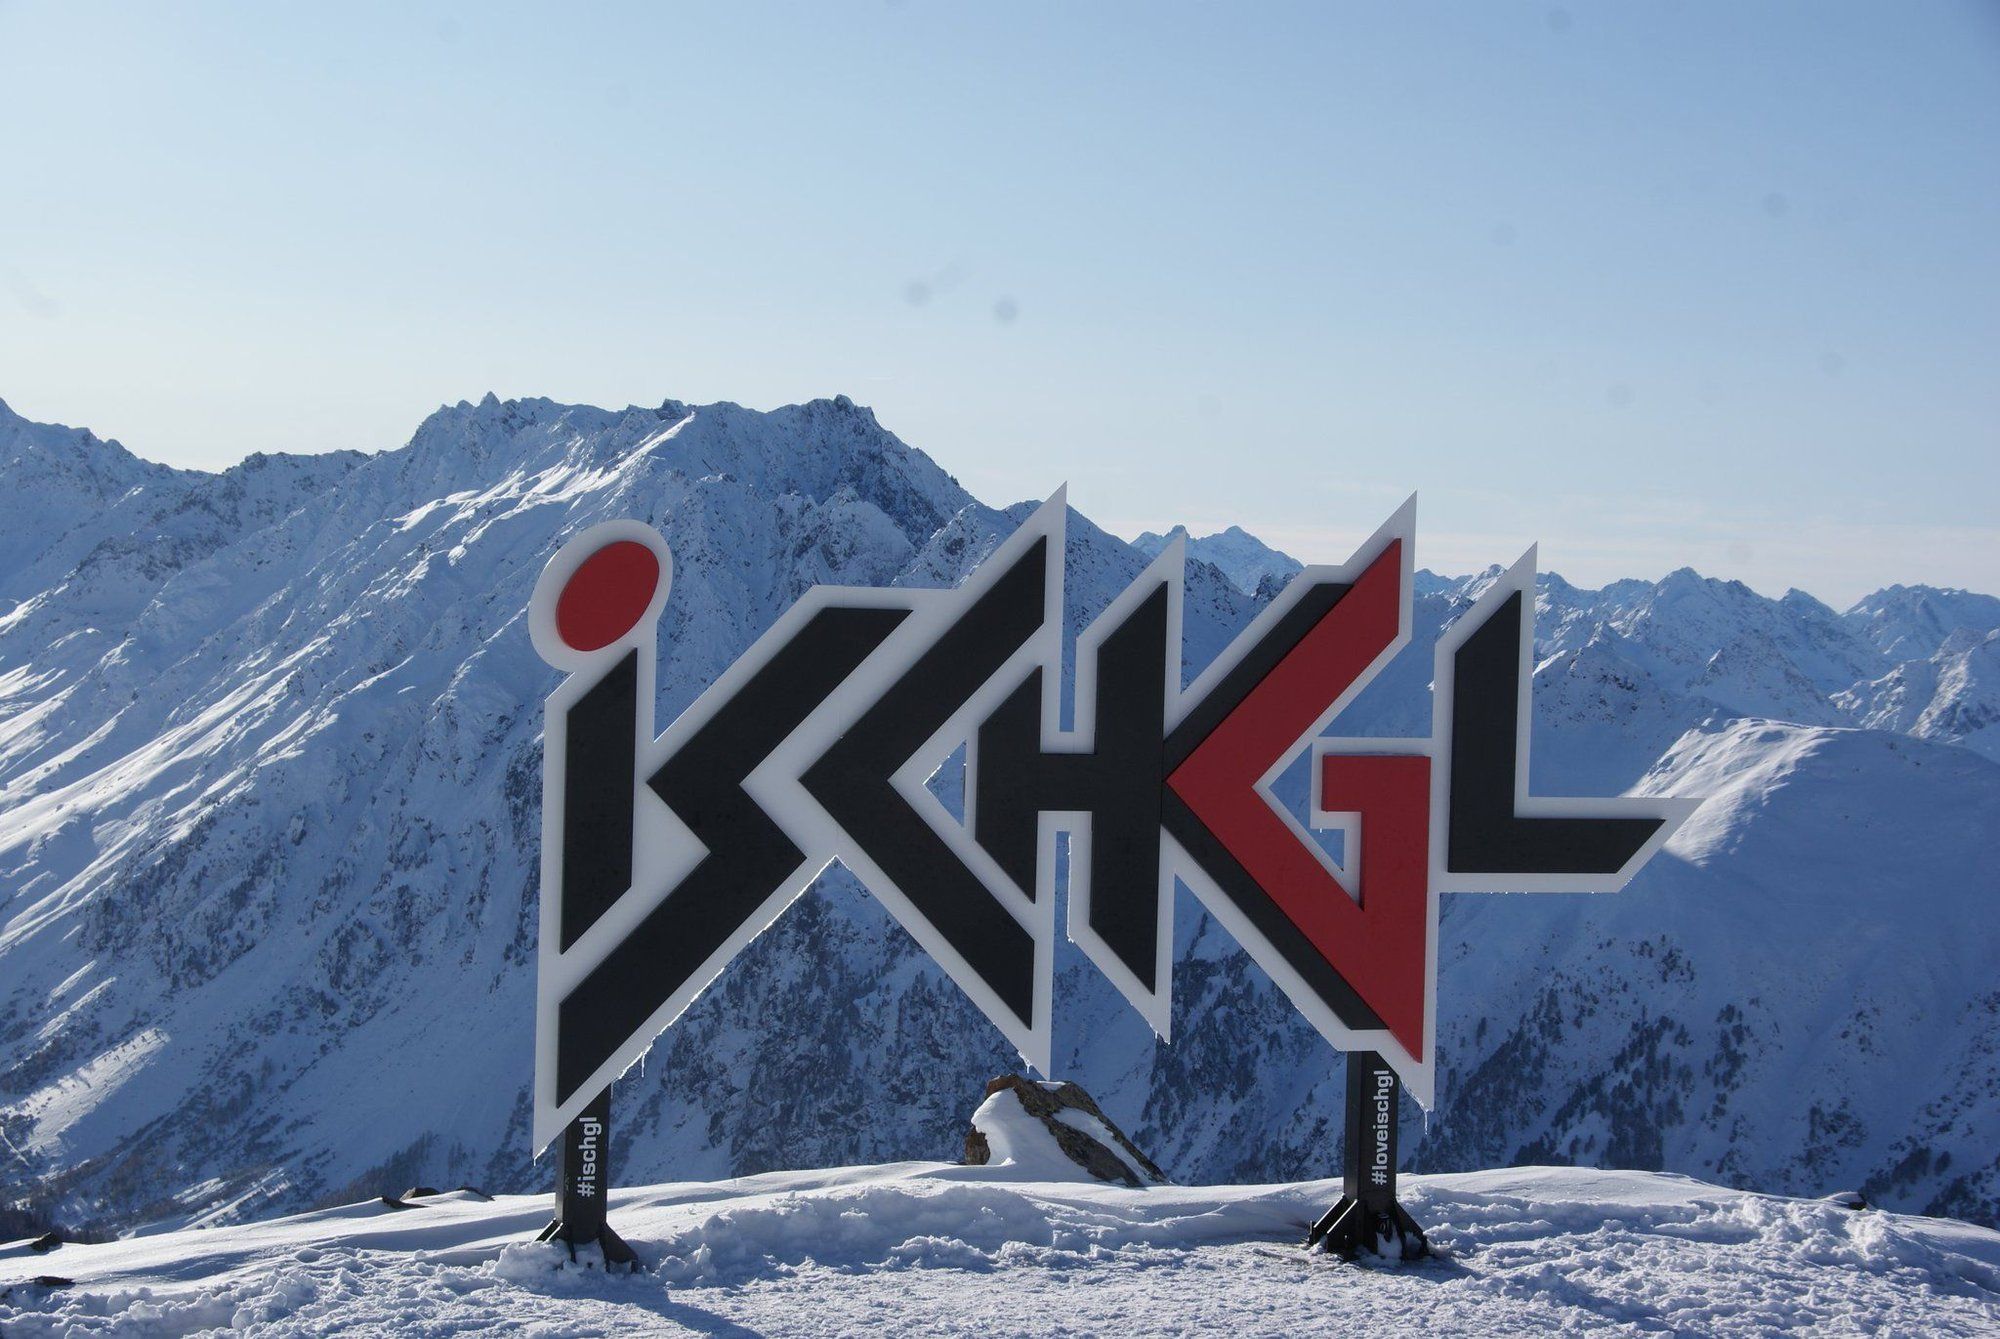 The picture shows the red and black "Ischgl" lettering in a snow and mountain landscape.